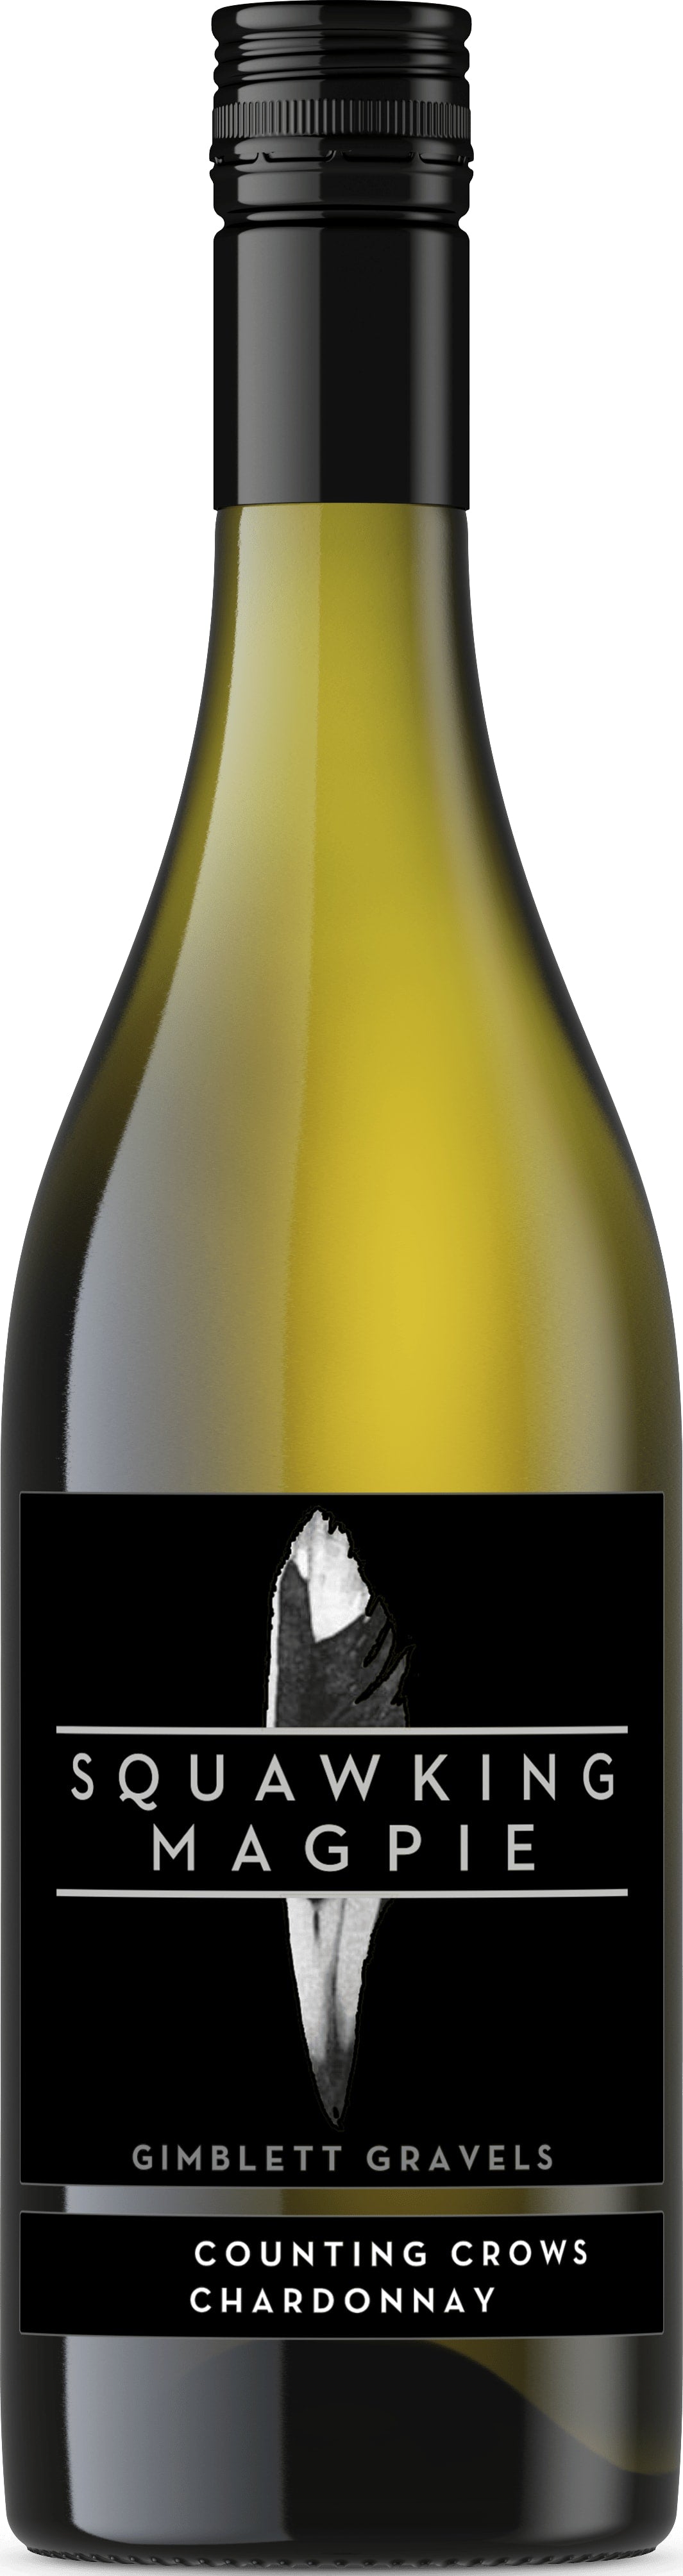 Squawking Magpie Counting Crows Chardonnay 2019 75cl - Buy Squawking Magpie Wines from GREAT WINES DIRECT wine shop